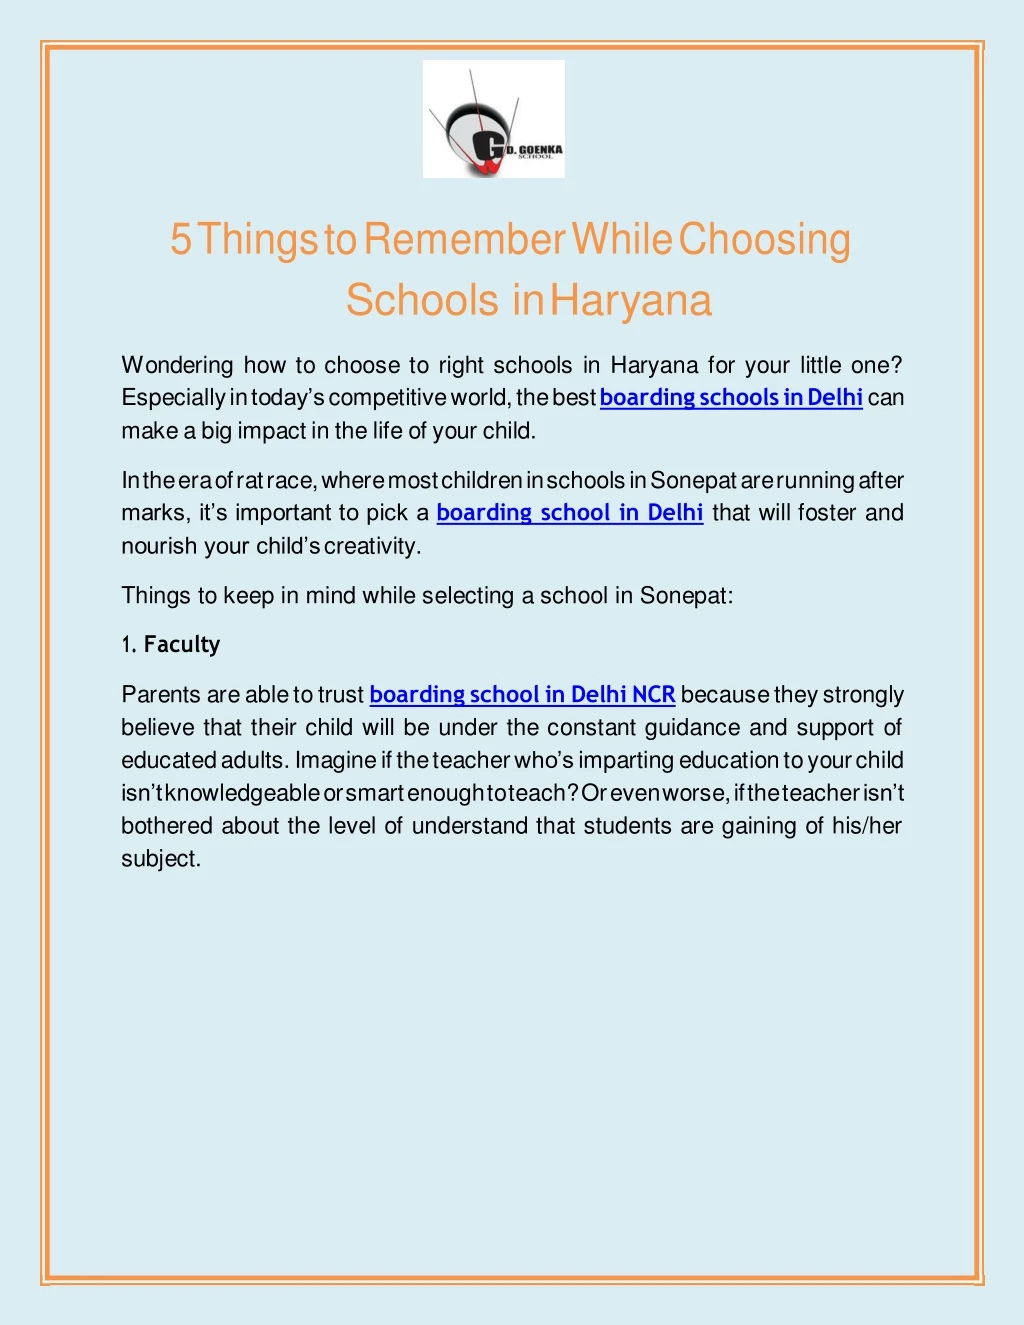 5 things to remember while choosing schools